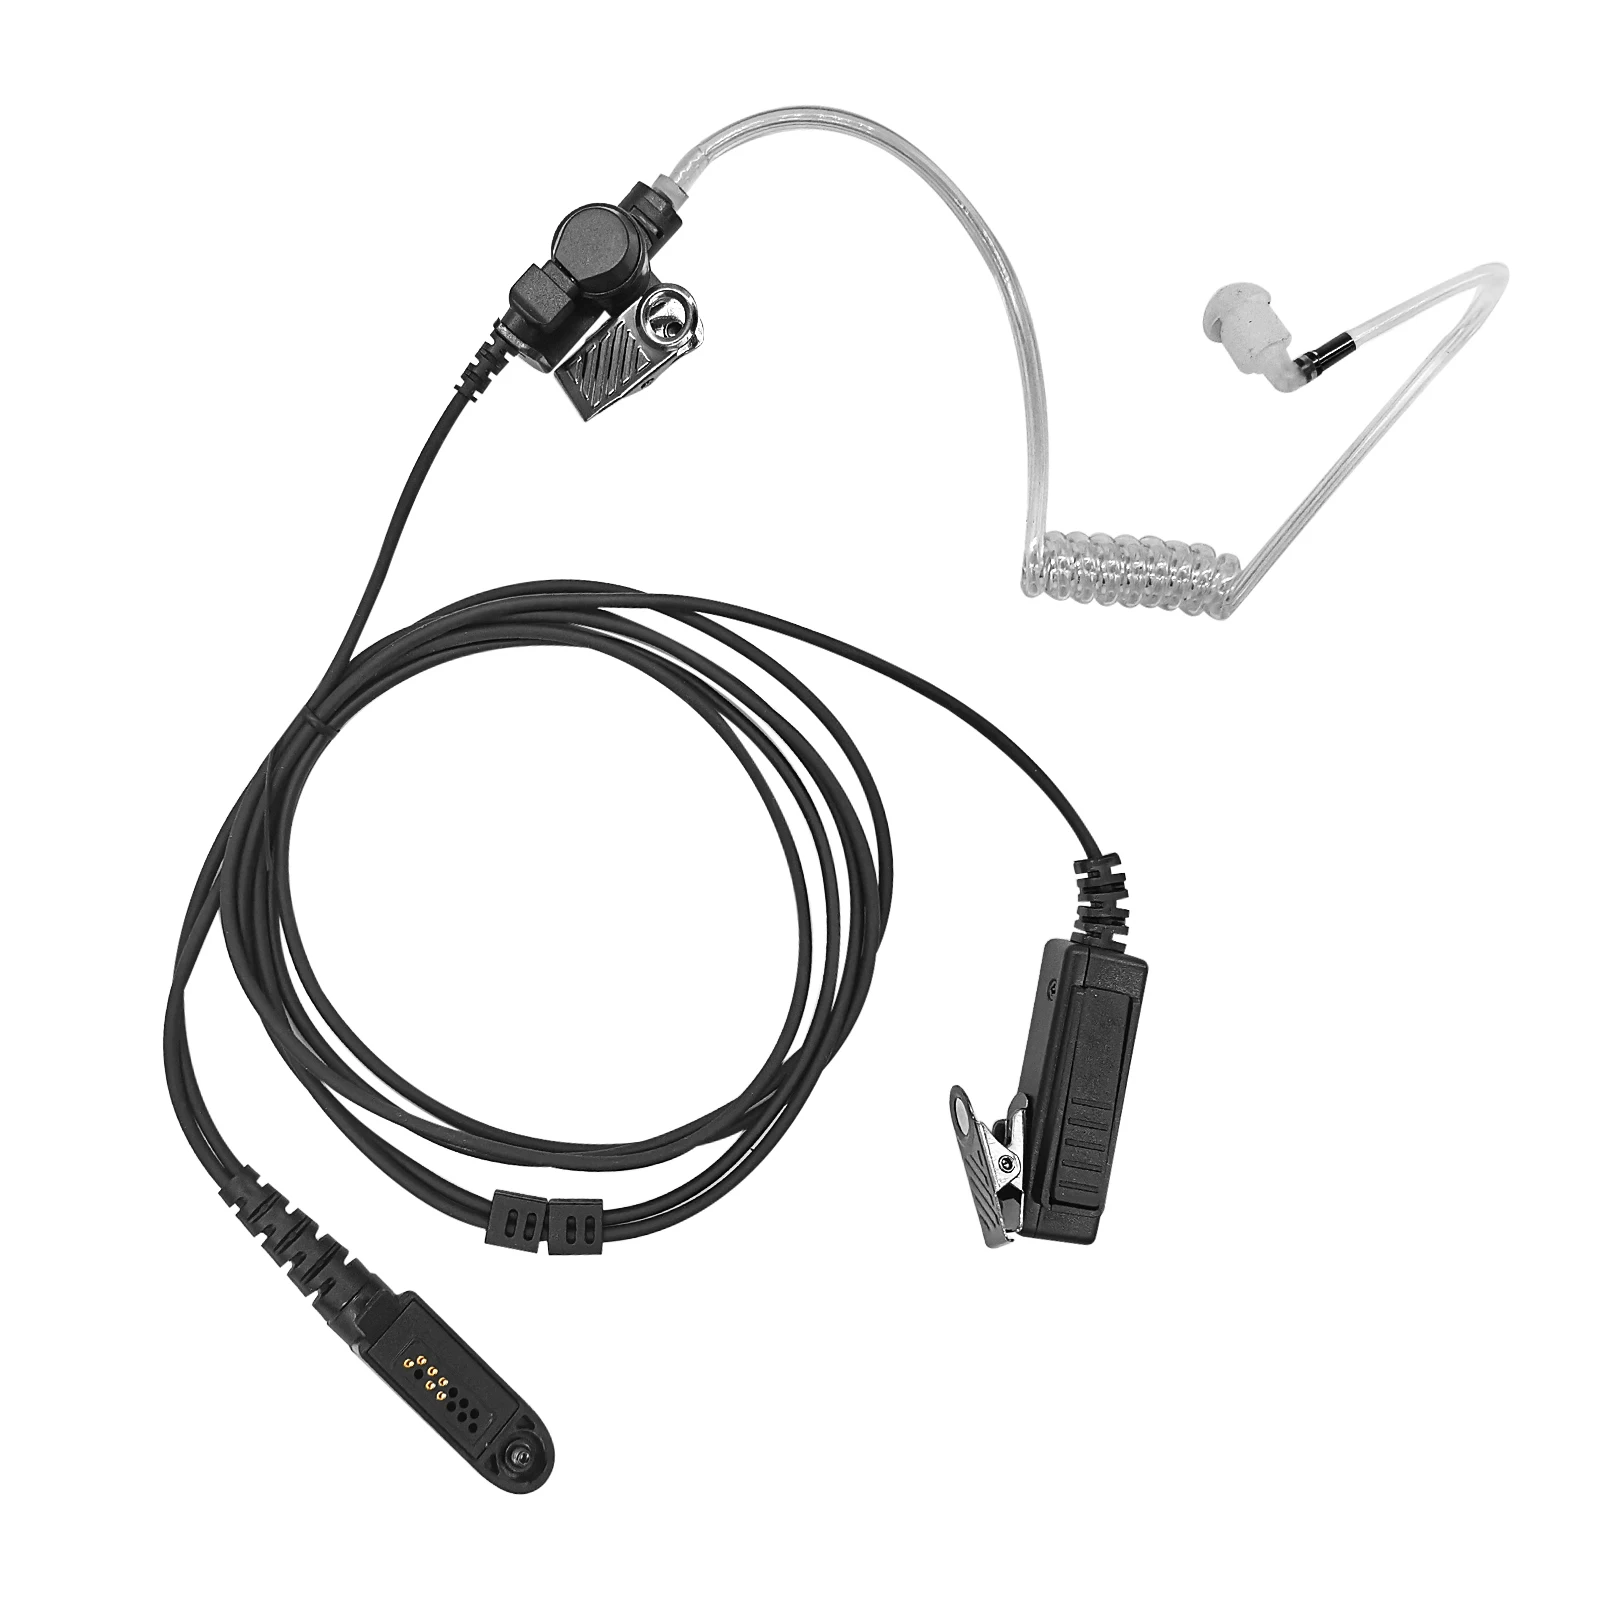 Acoustic Tube Surveillance Earpiece Headset with PTT, 2 Wire Air Covert, for Motorola Radio single wire acoustic tube surveillance earpiece escort bodyguard security headset for motorola radio clp1010 clp1040 clp1060